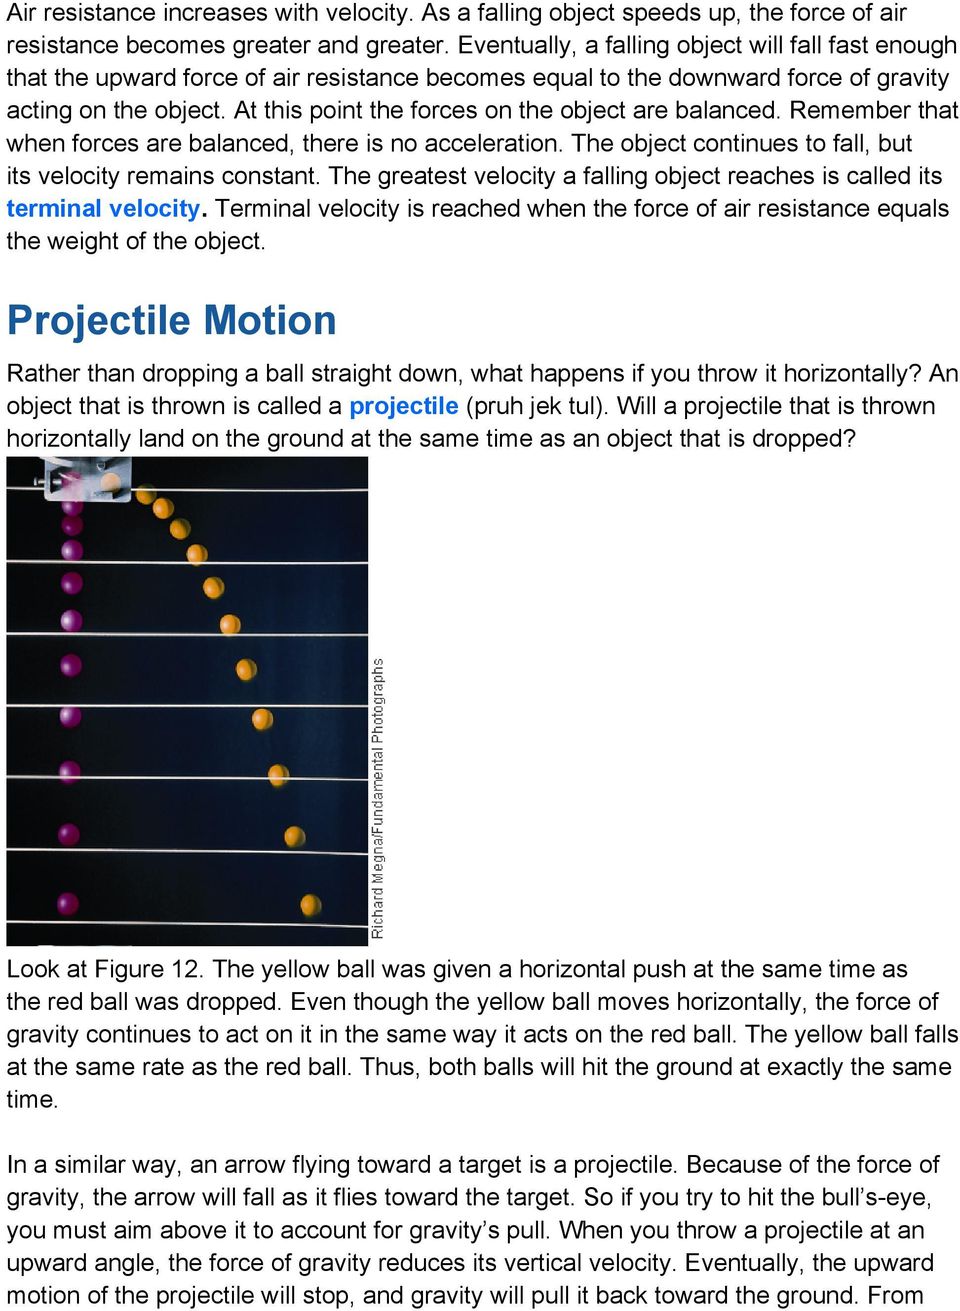 At this point the forces on the object are balanced. Remember that when forces are balanced, there is no acceleration. The object continues to fall, but its velocity remains constant.